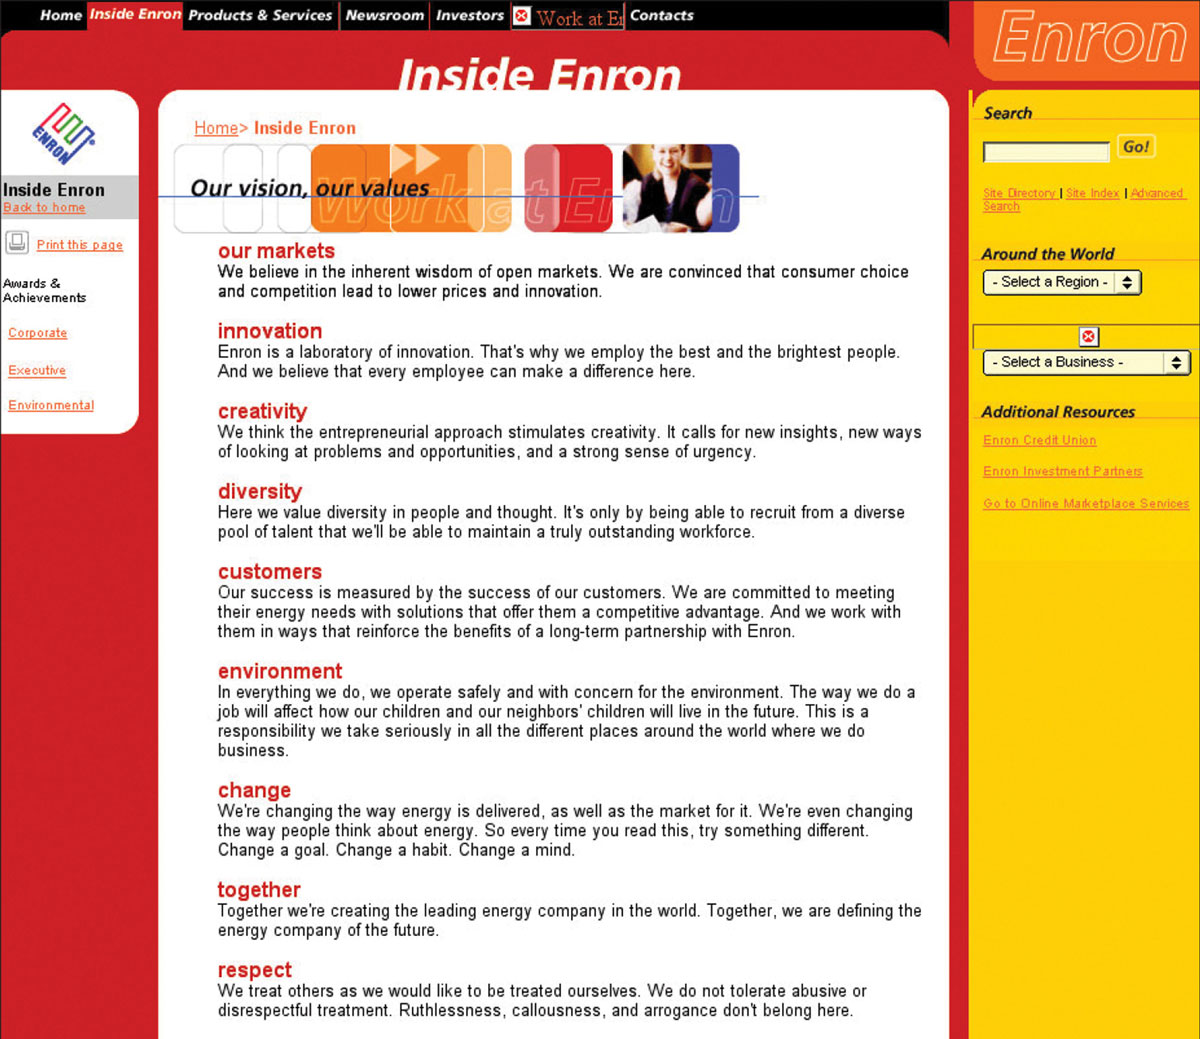 Inside Enron webpage from the Internet Archive.